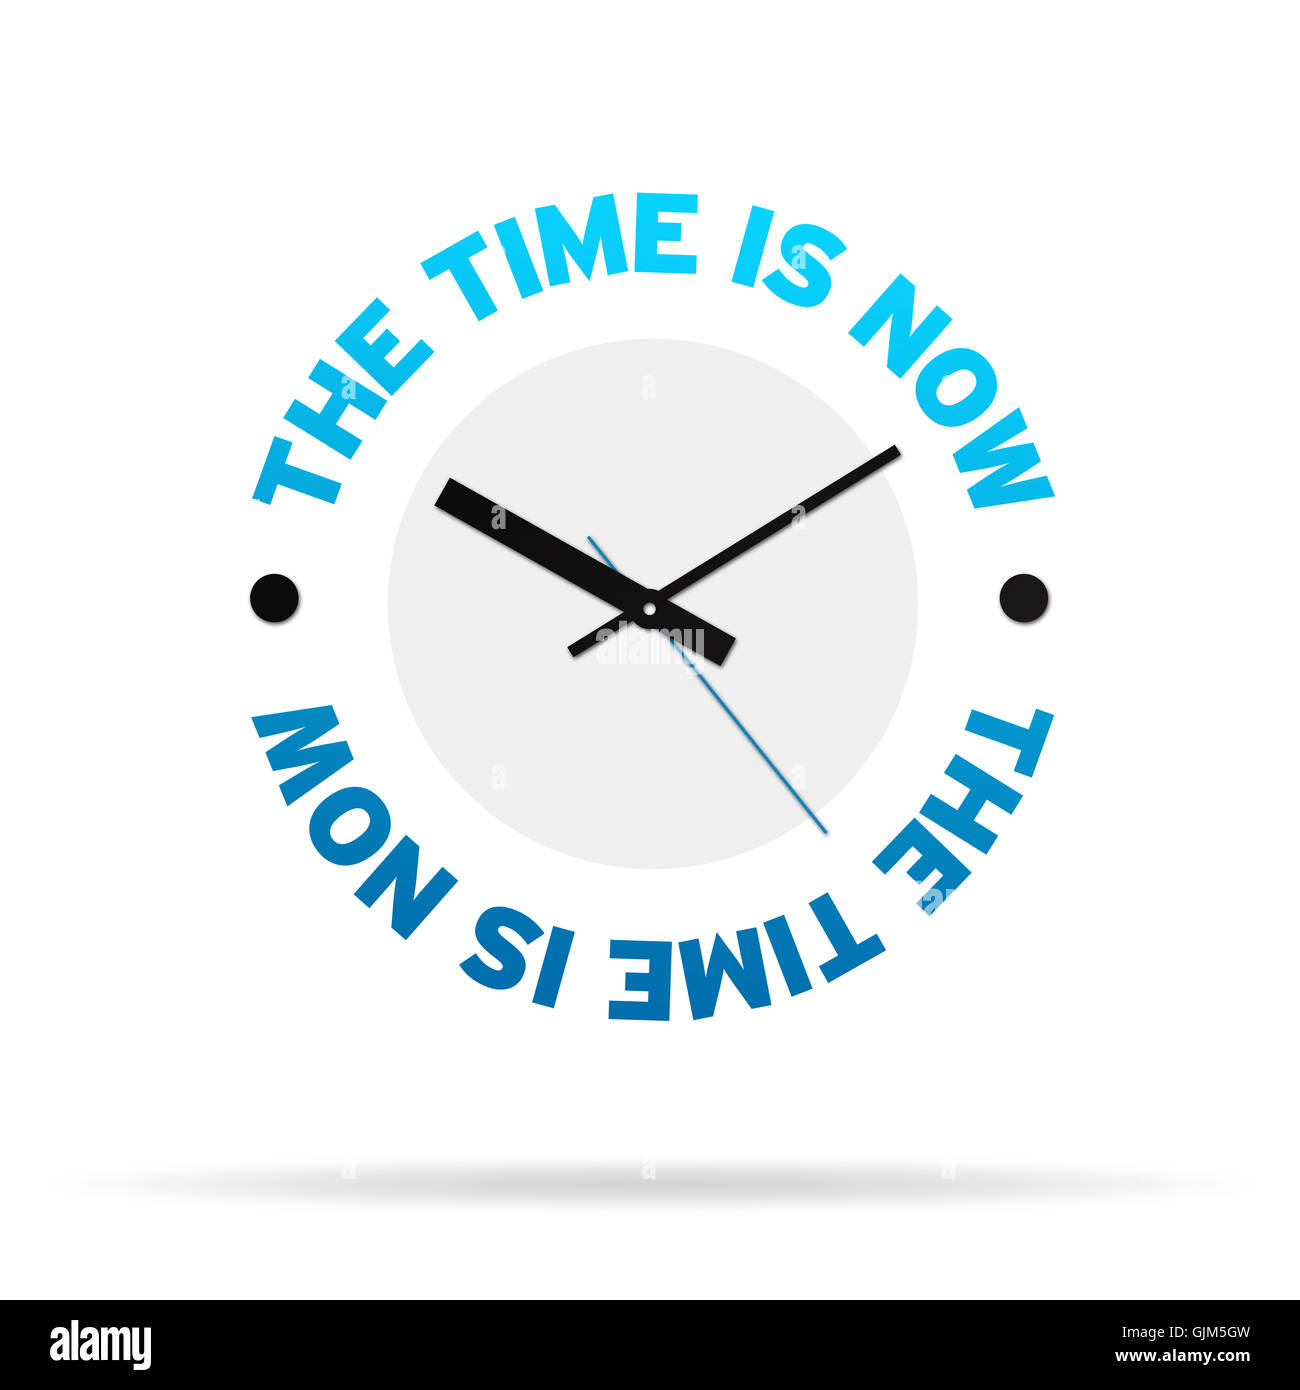 The Time is Now Clock Stock Photo